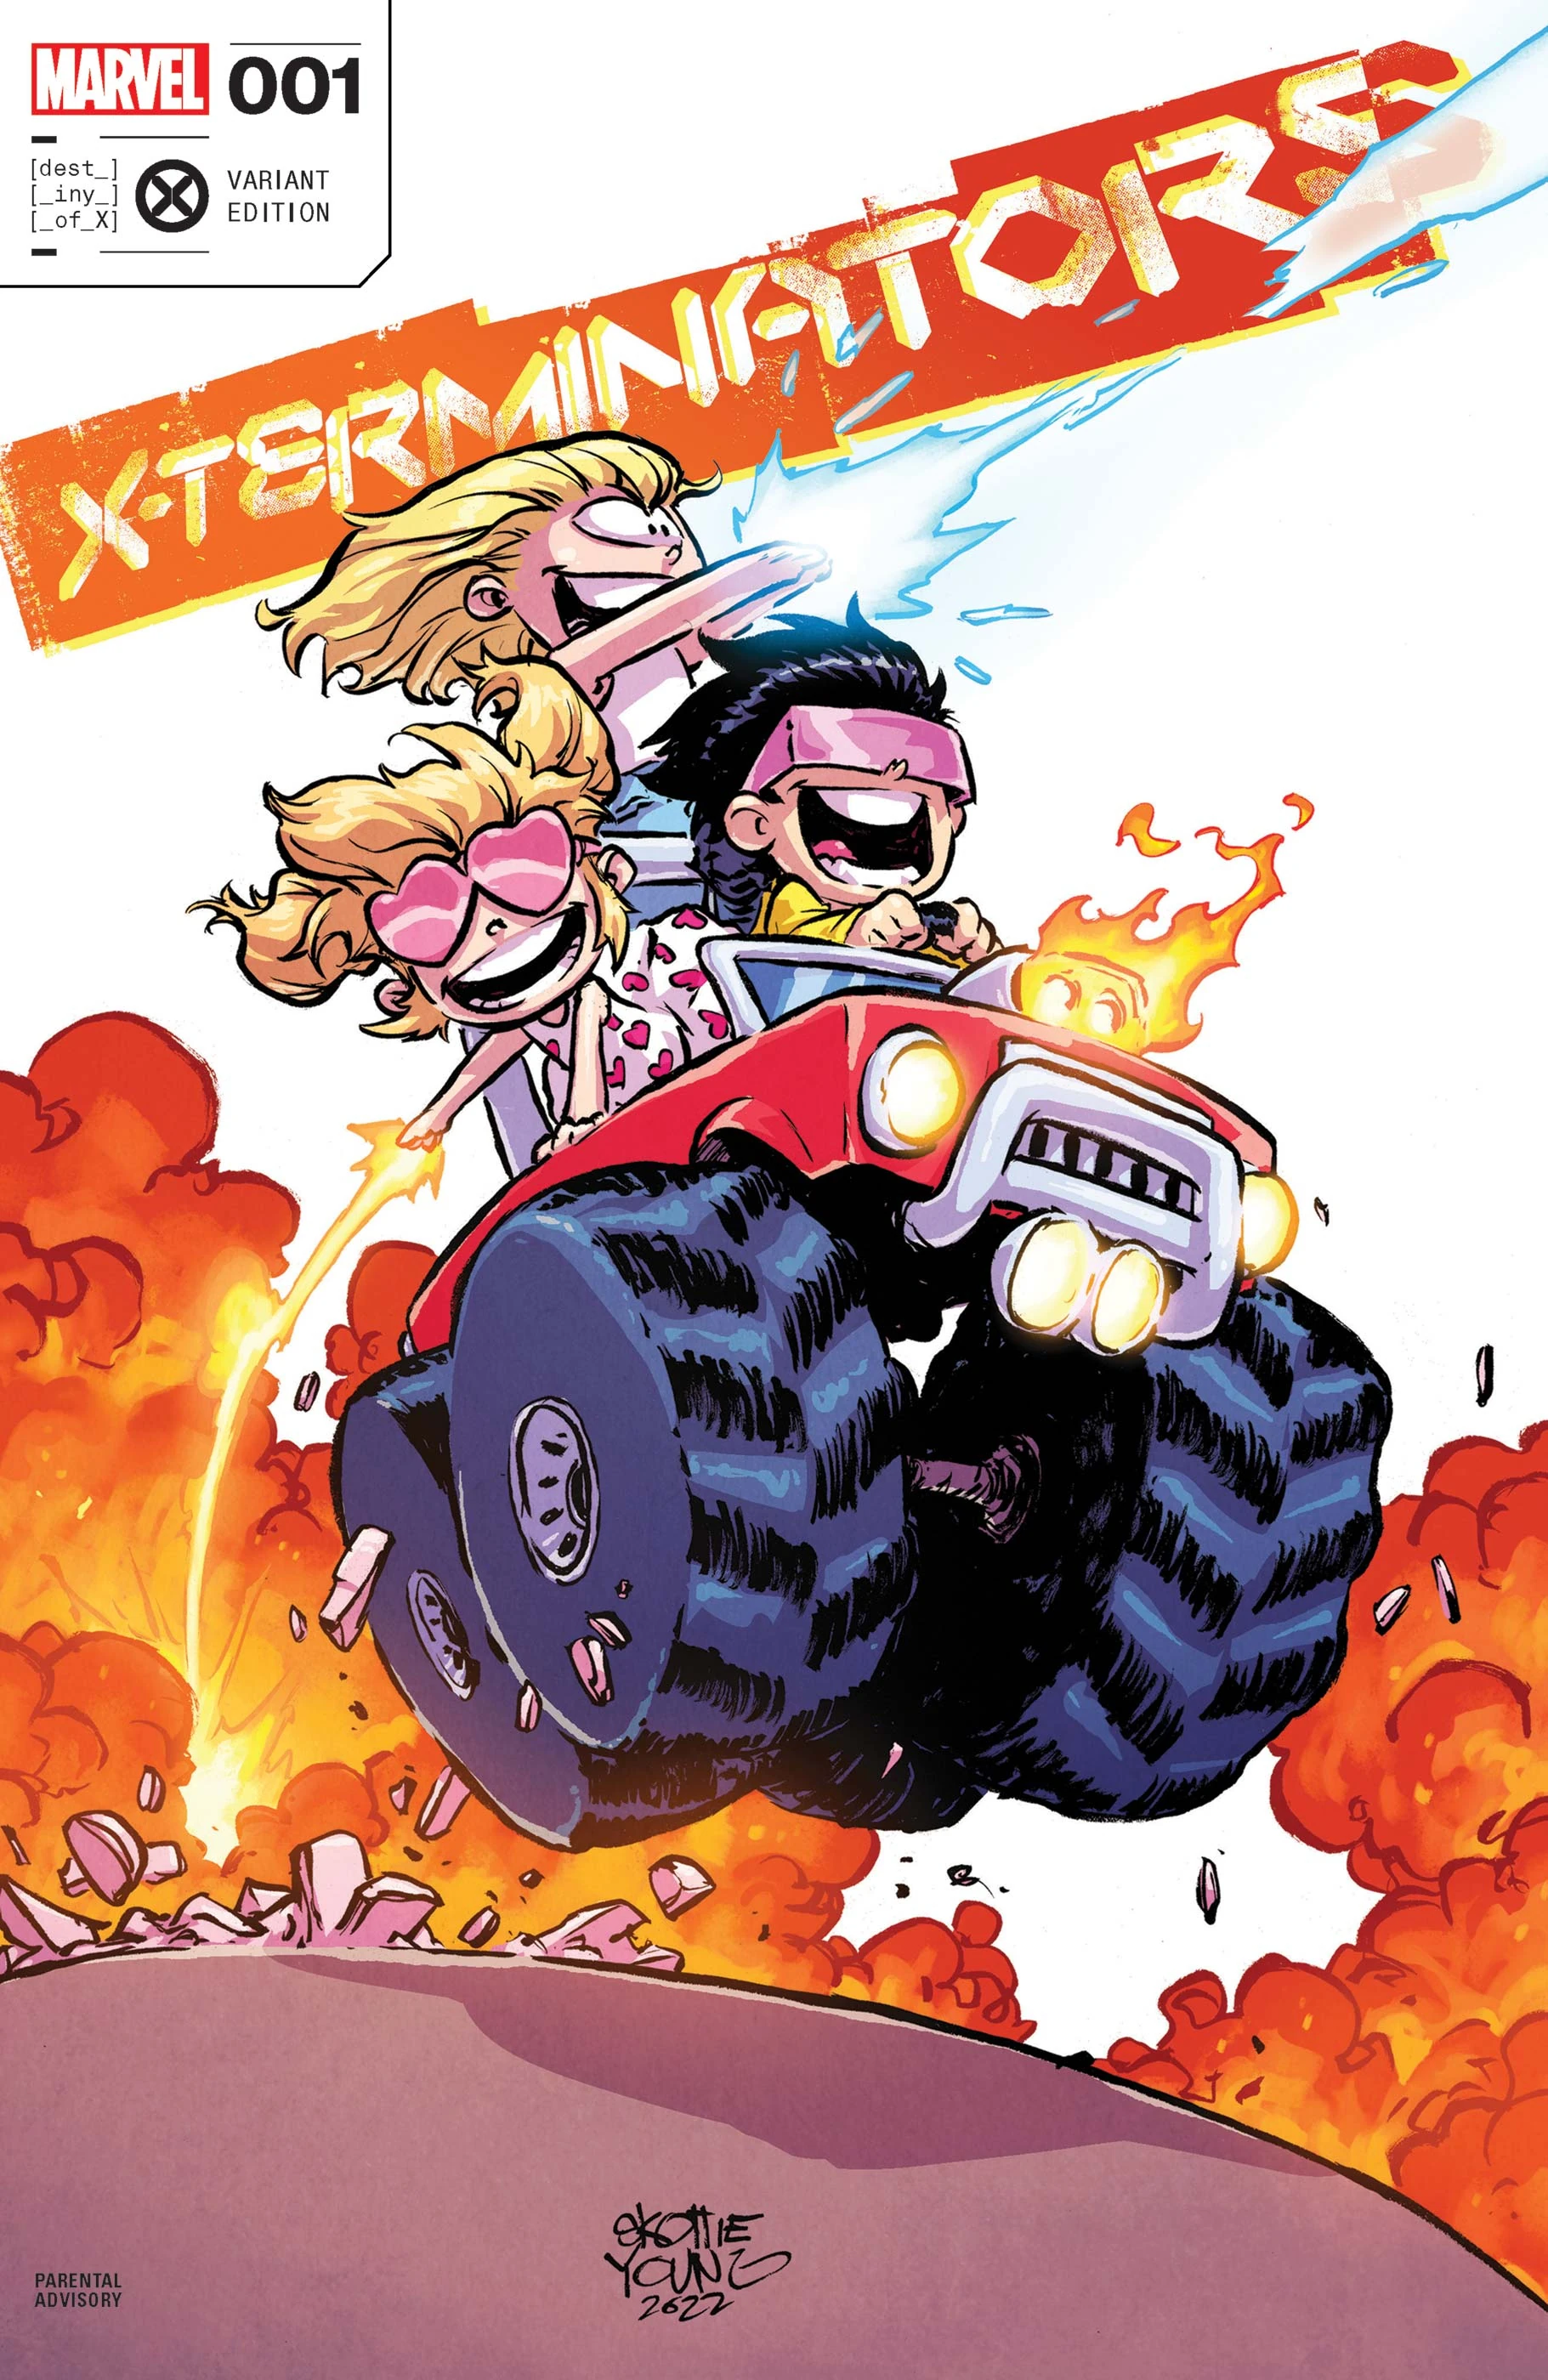 Jubilee, Dazzler, and Boom-Boom go for a ride on Skottie Young's variant cover to X-Terminators Vol. 2 #1 "This Book Is Gleefully Transgressive" (2022), Marvel Comics